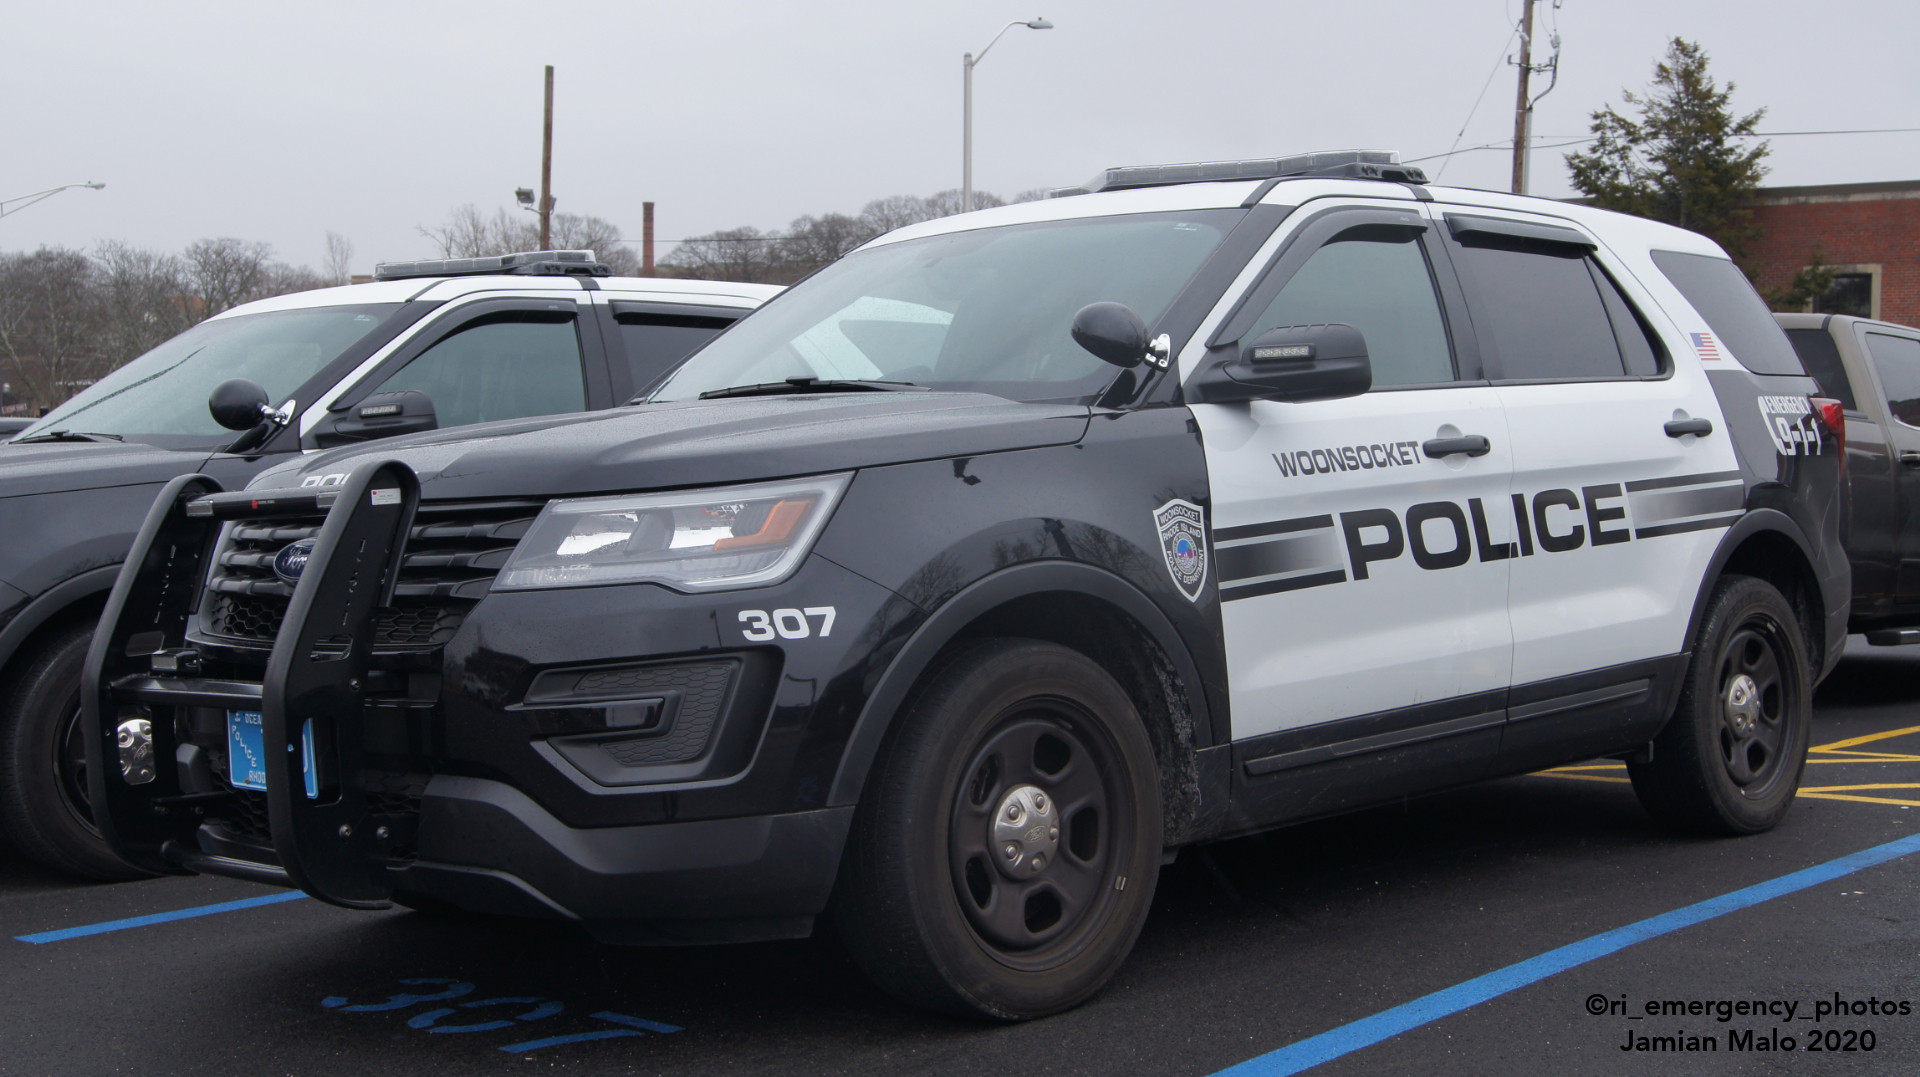 A photo  of Woonsocket Police
            Cruiser 307, a 2016-2019 Ford Police Interceptor Utility             taken by Jamian Malo